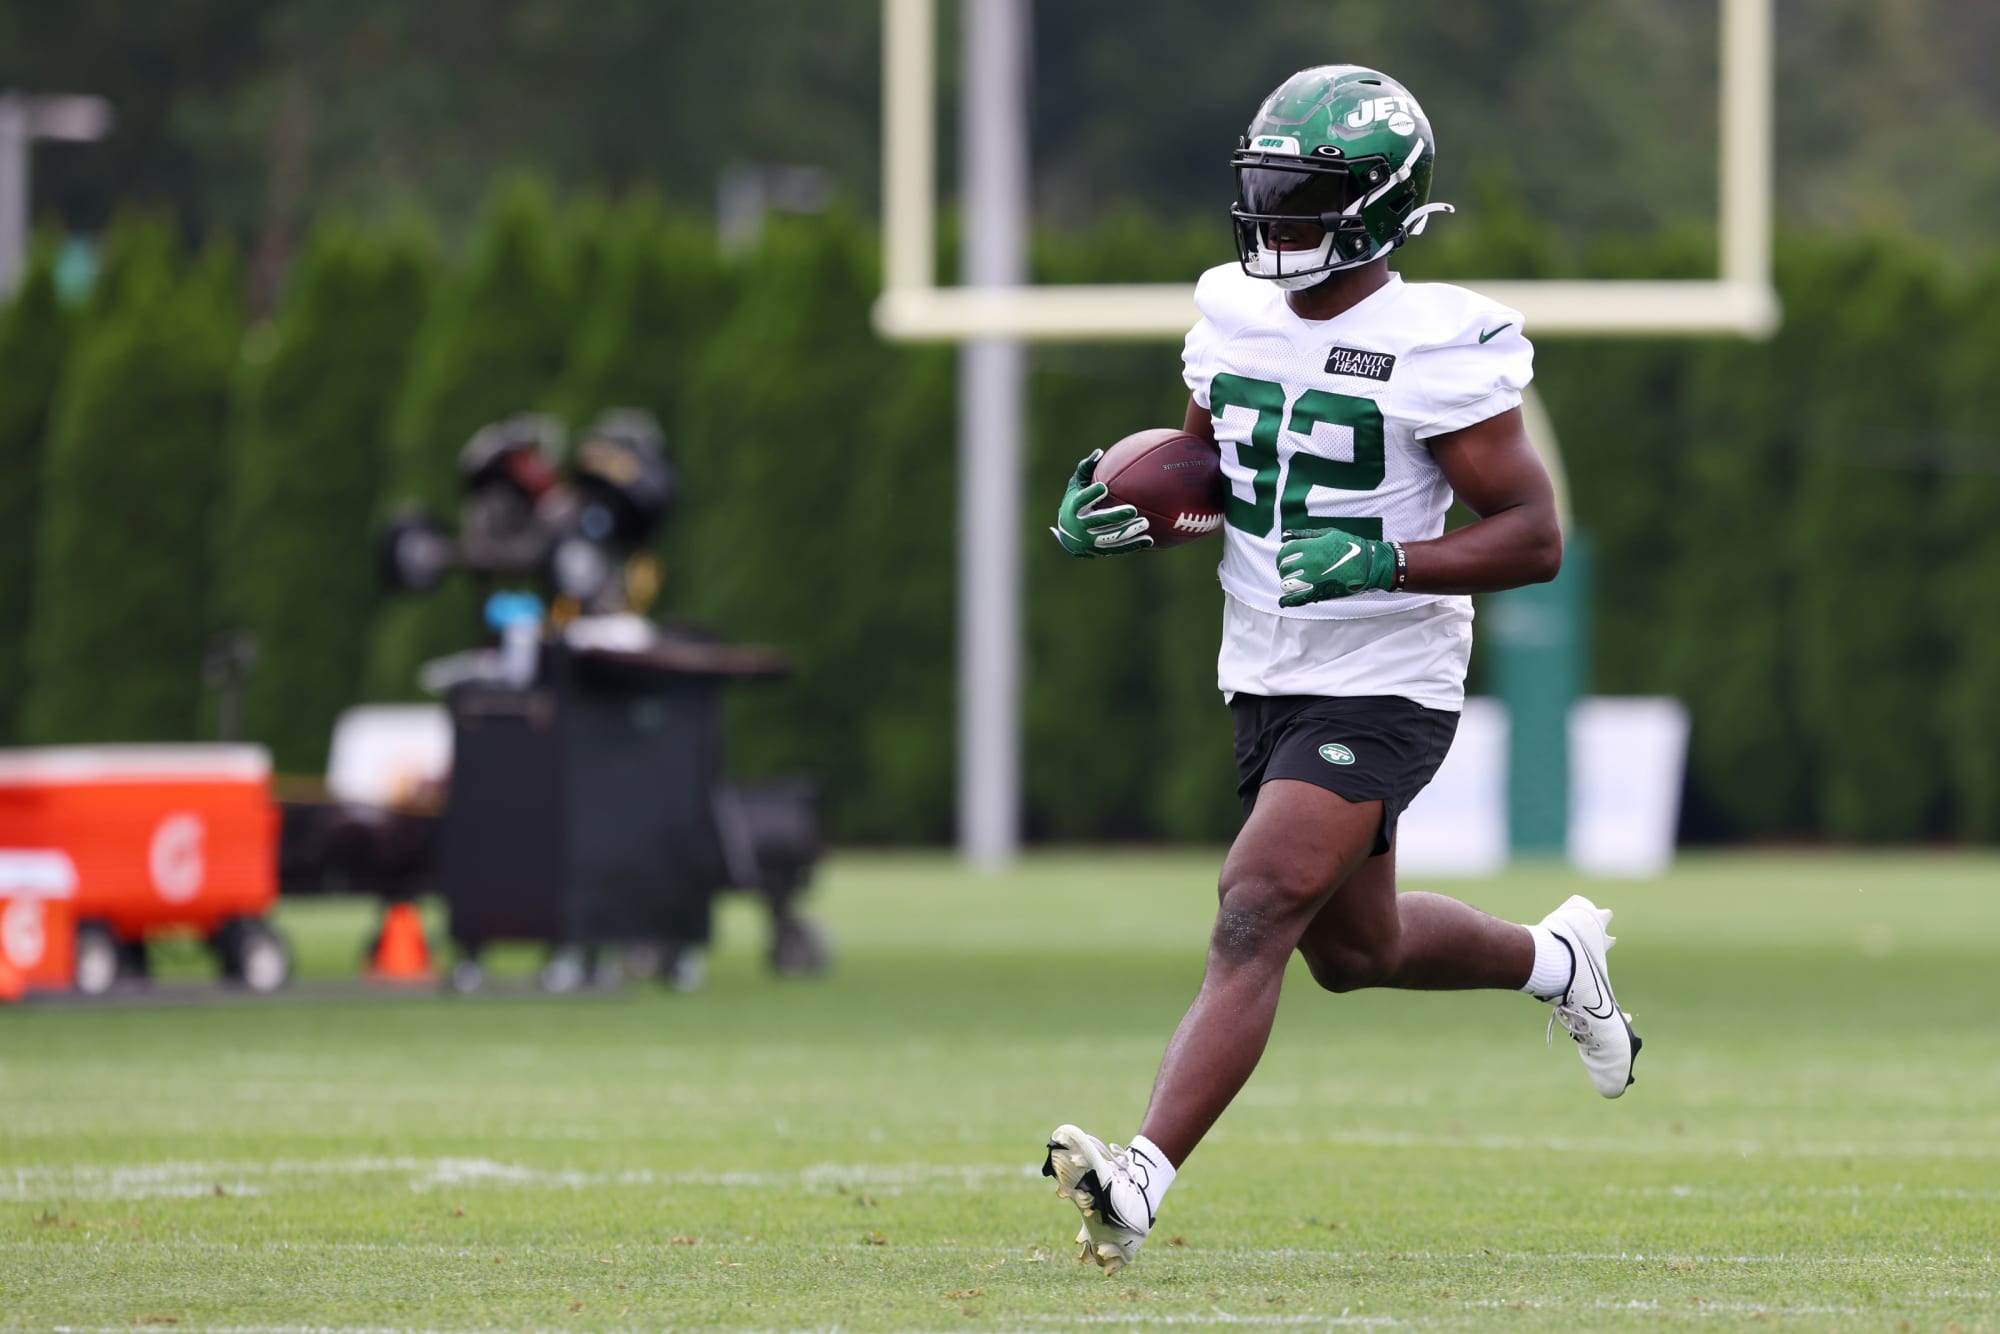 UNC Football: Michael Carter is out to prove 'a lot' with Jets